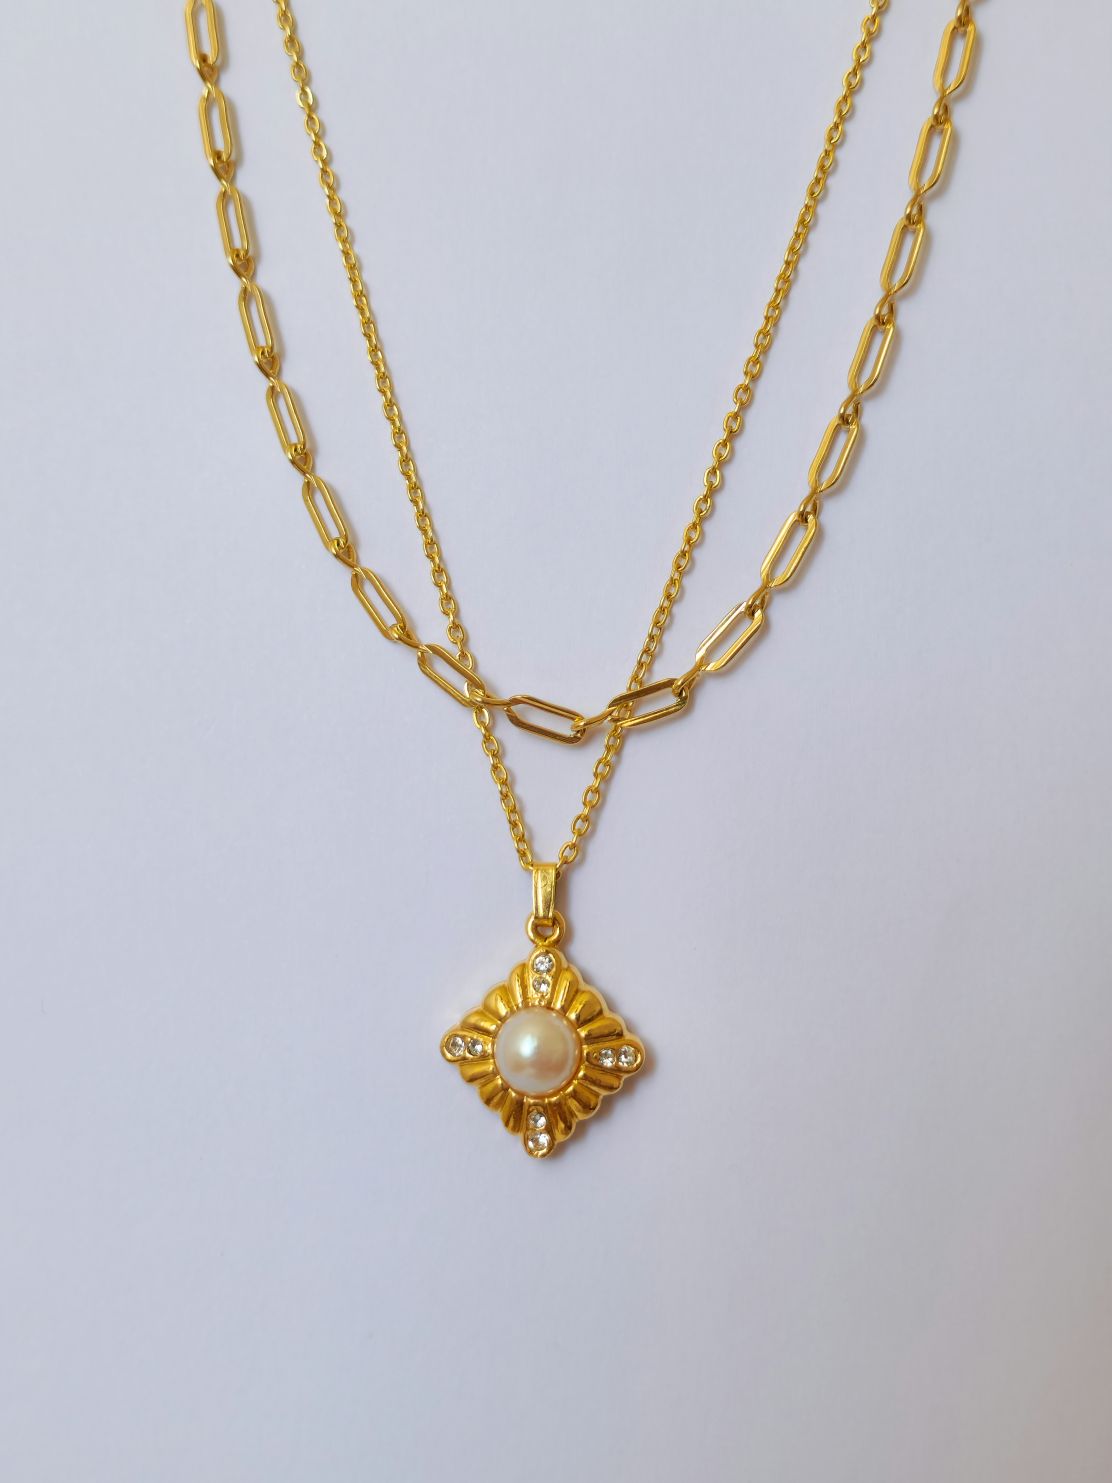 Vintage Gold Plated Thin Cable Chain Pendant Necklace with Pearl and Crystals